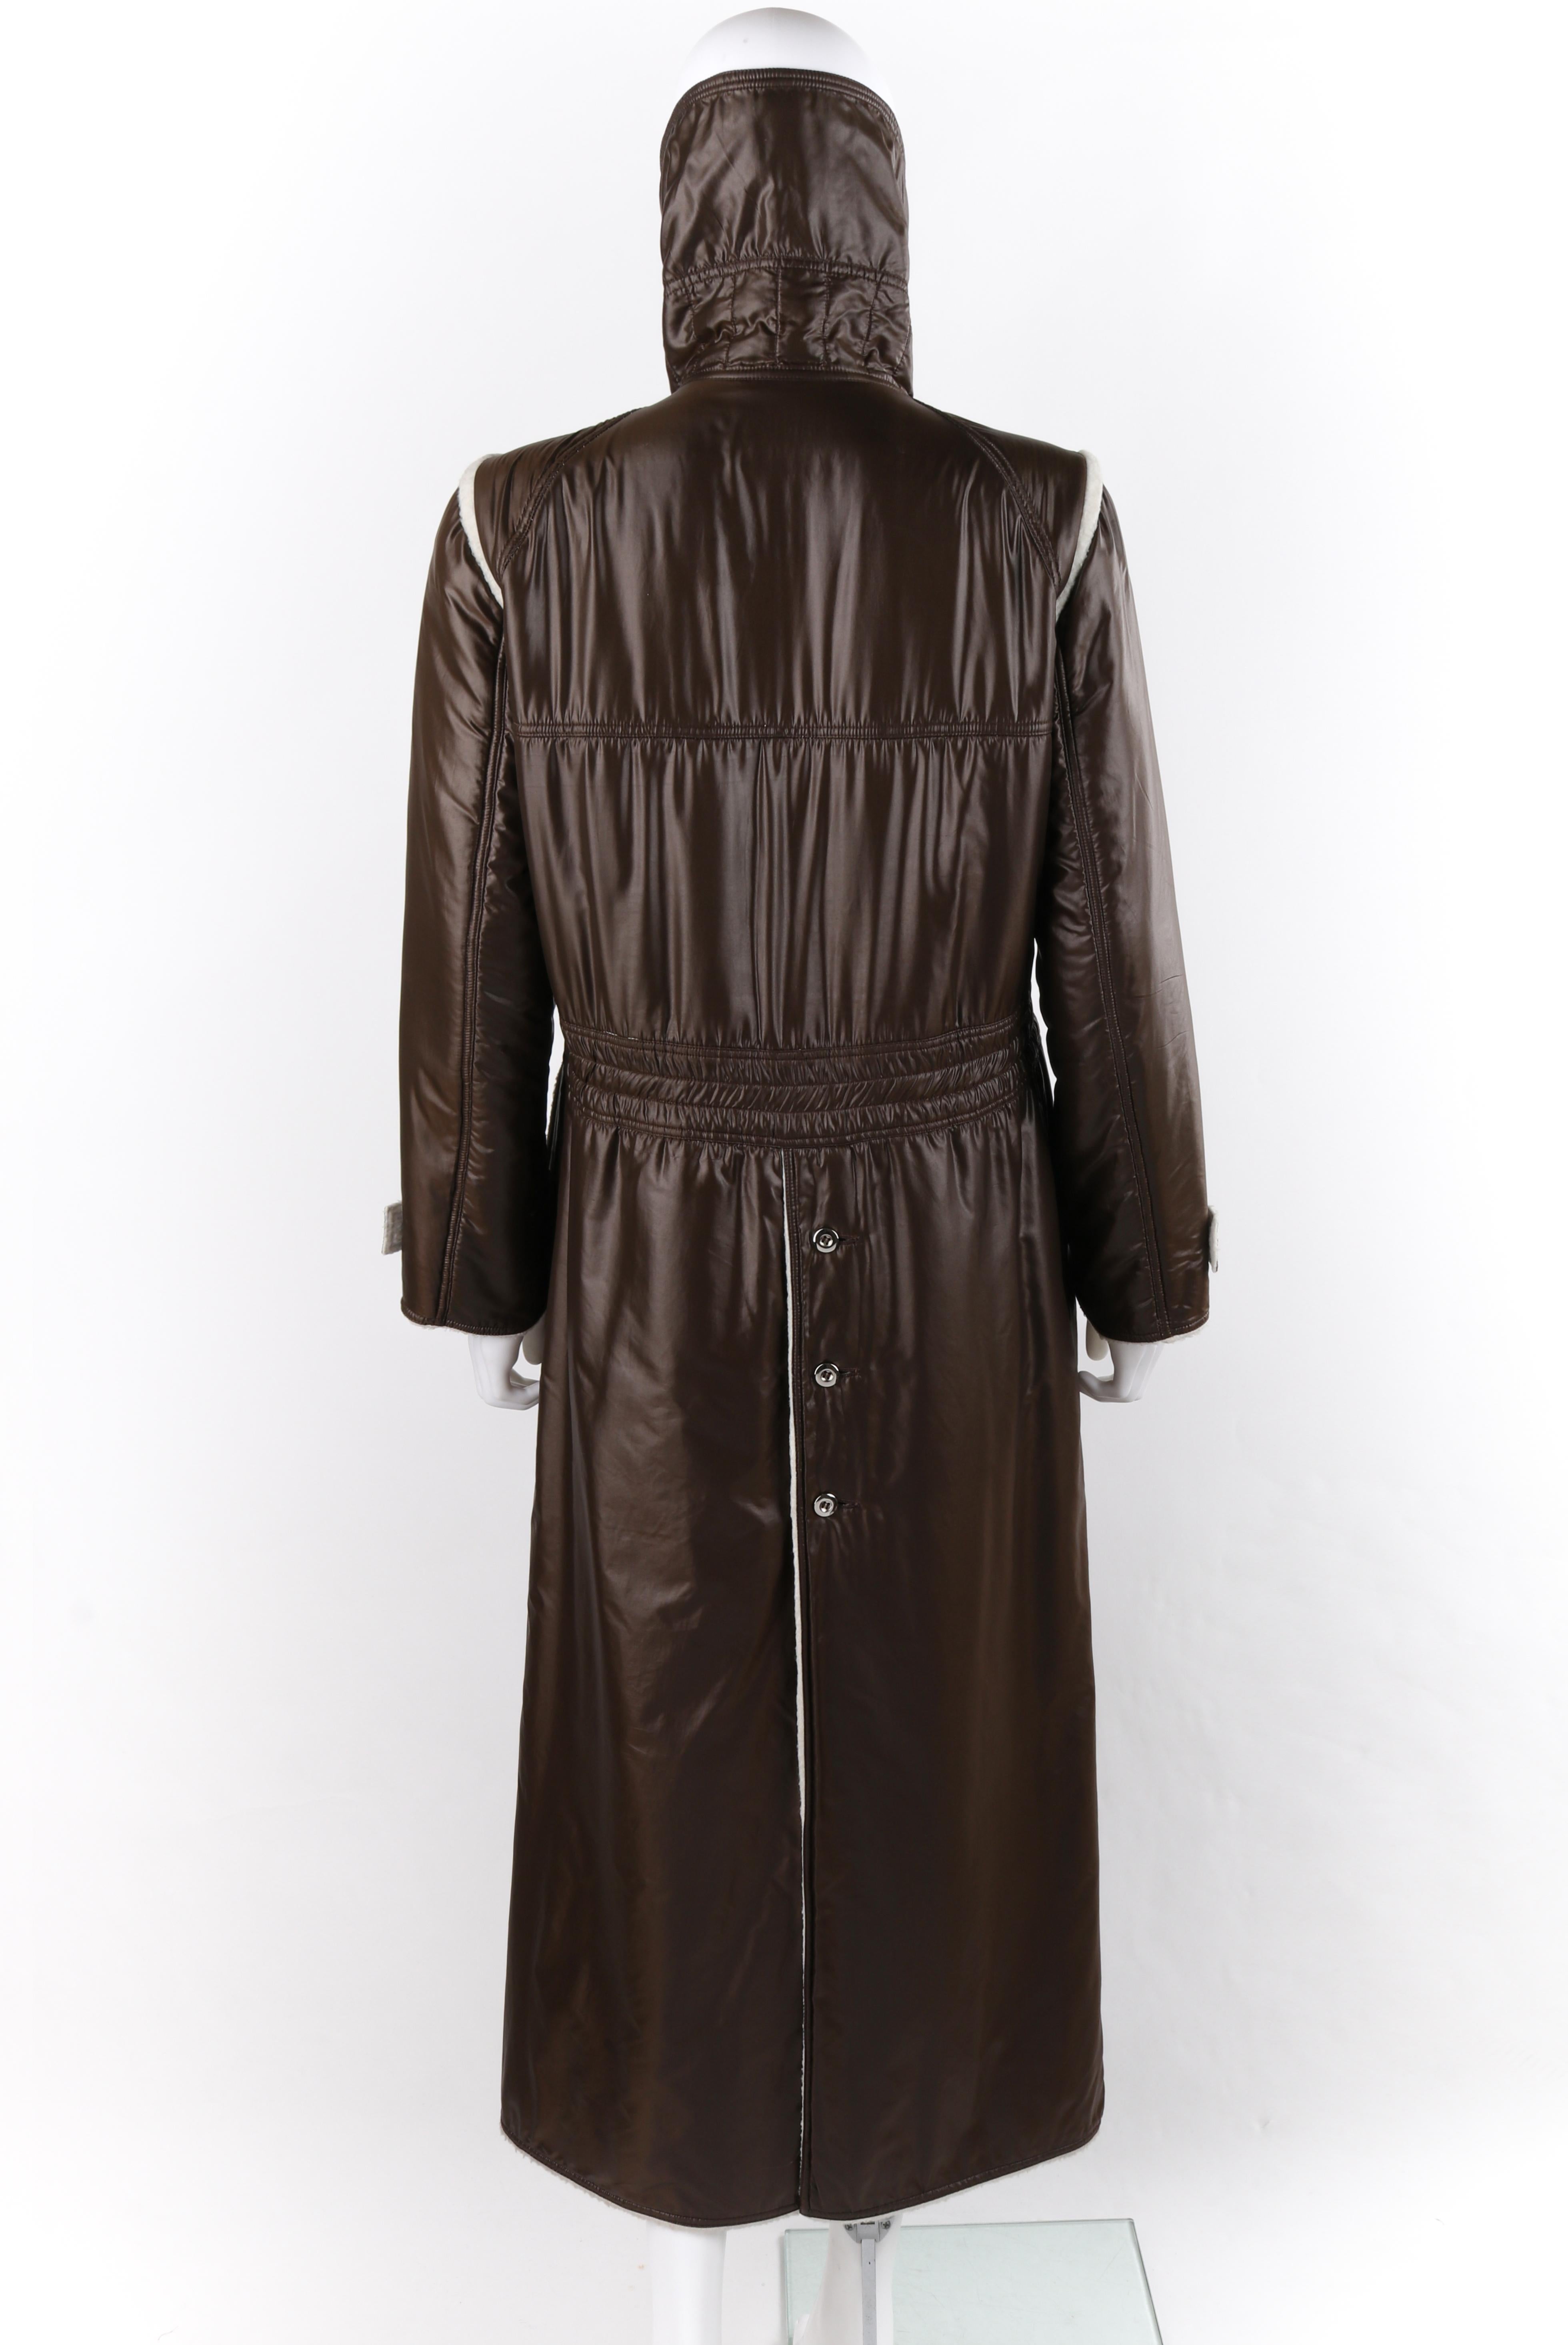 COURREGES c.1970’s Brown White Convertible Collar Full-Length Coat Jacket For Sale 1